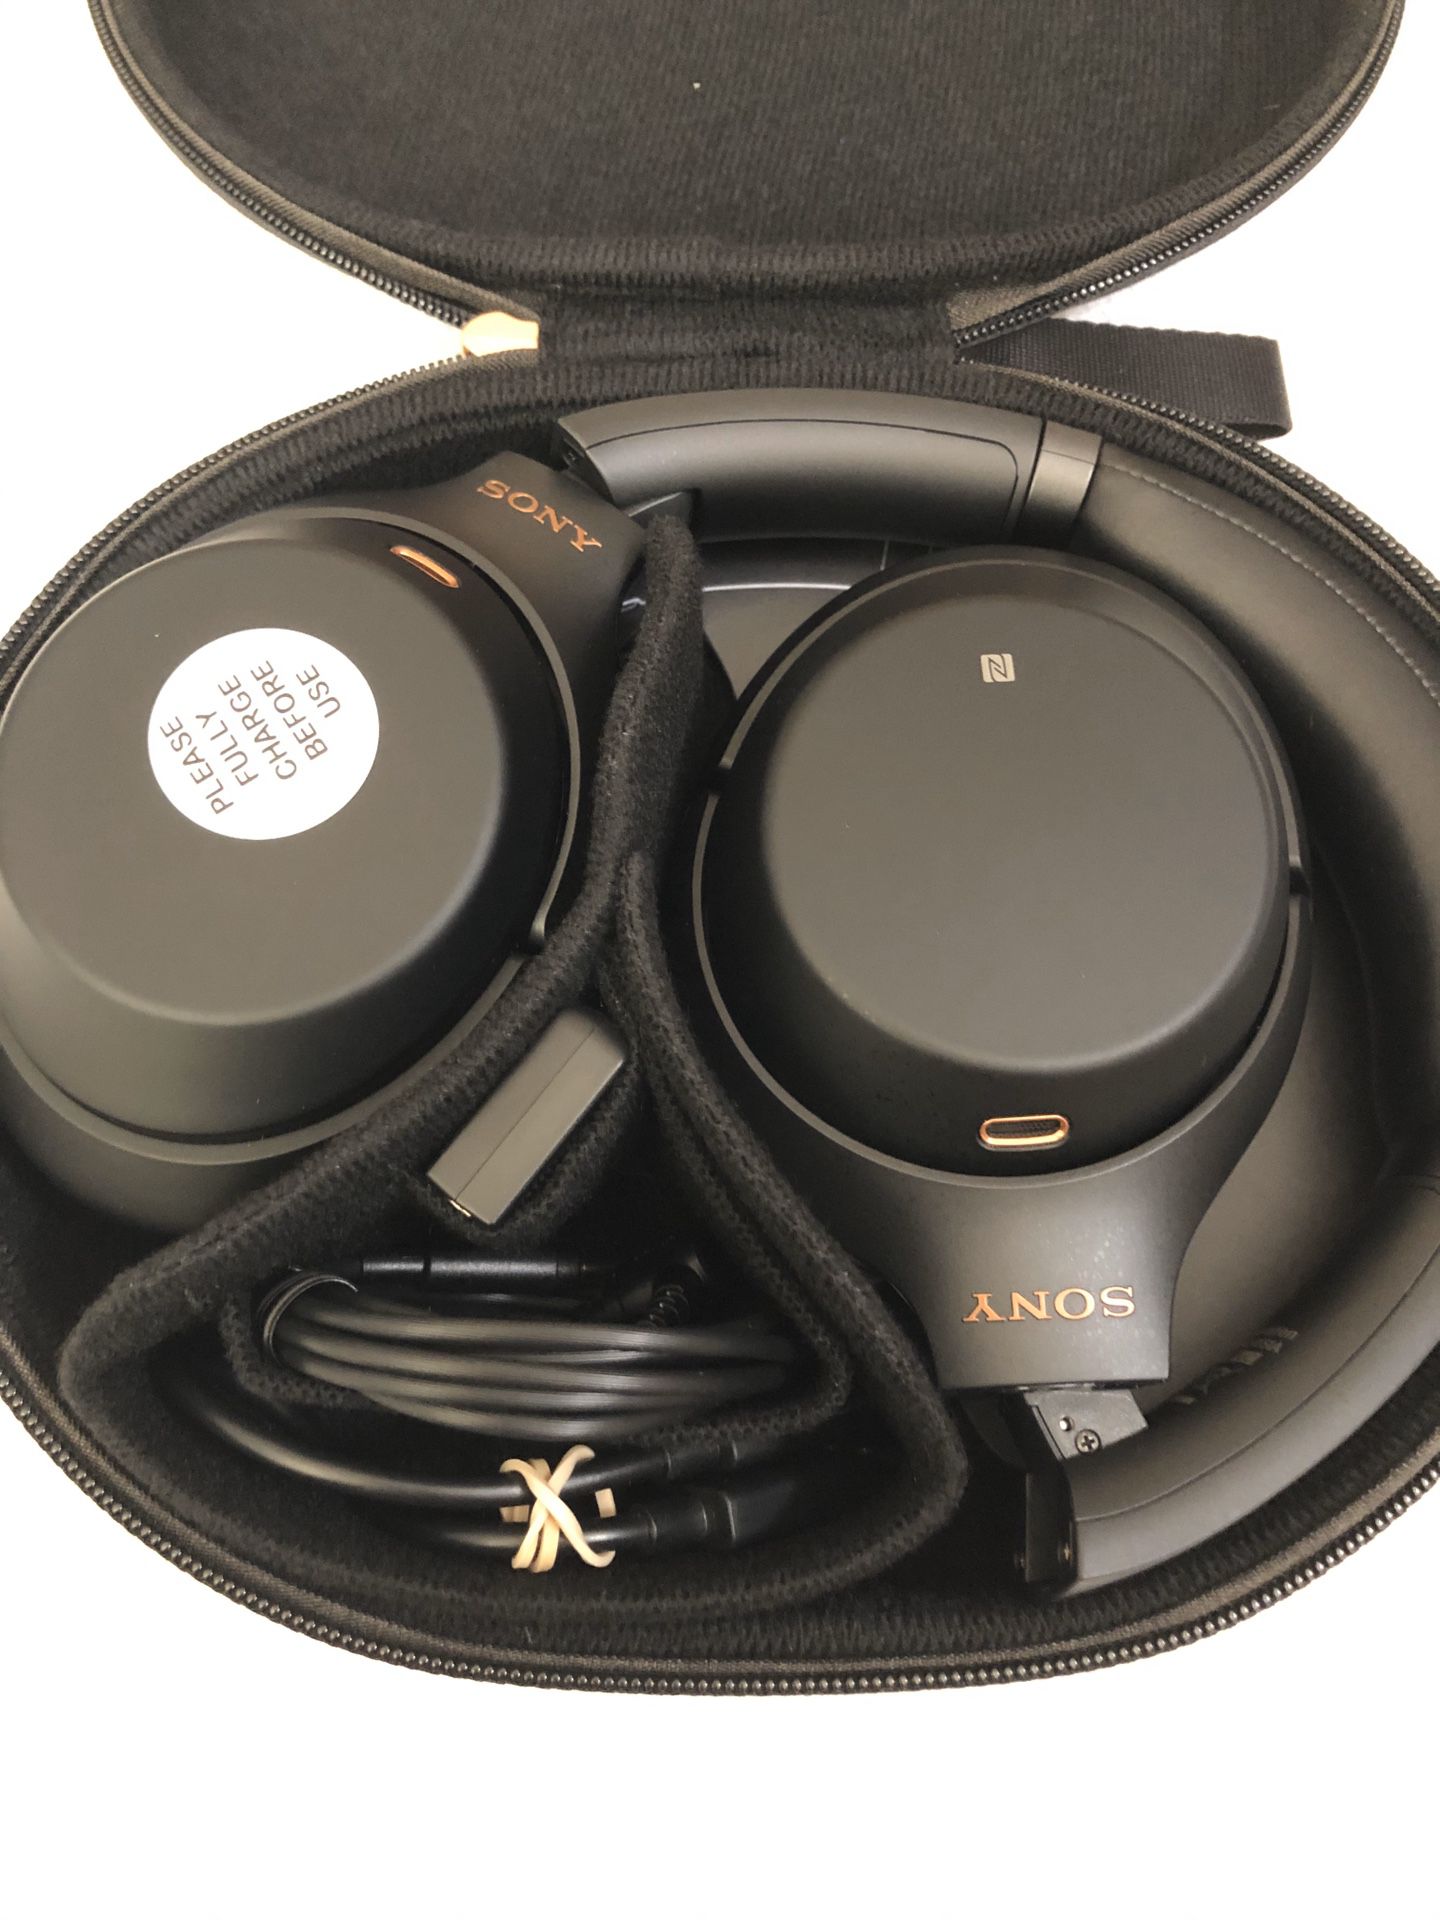 Sony - WH-1000XM3 Wireless Noise Canceling Over-the-Ear Headphones with Google Assistant - Black ( WH1000XM3 )